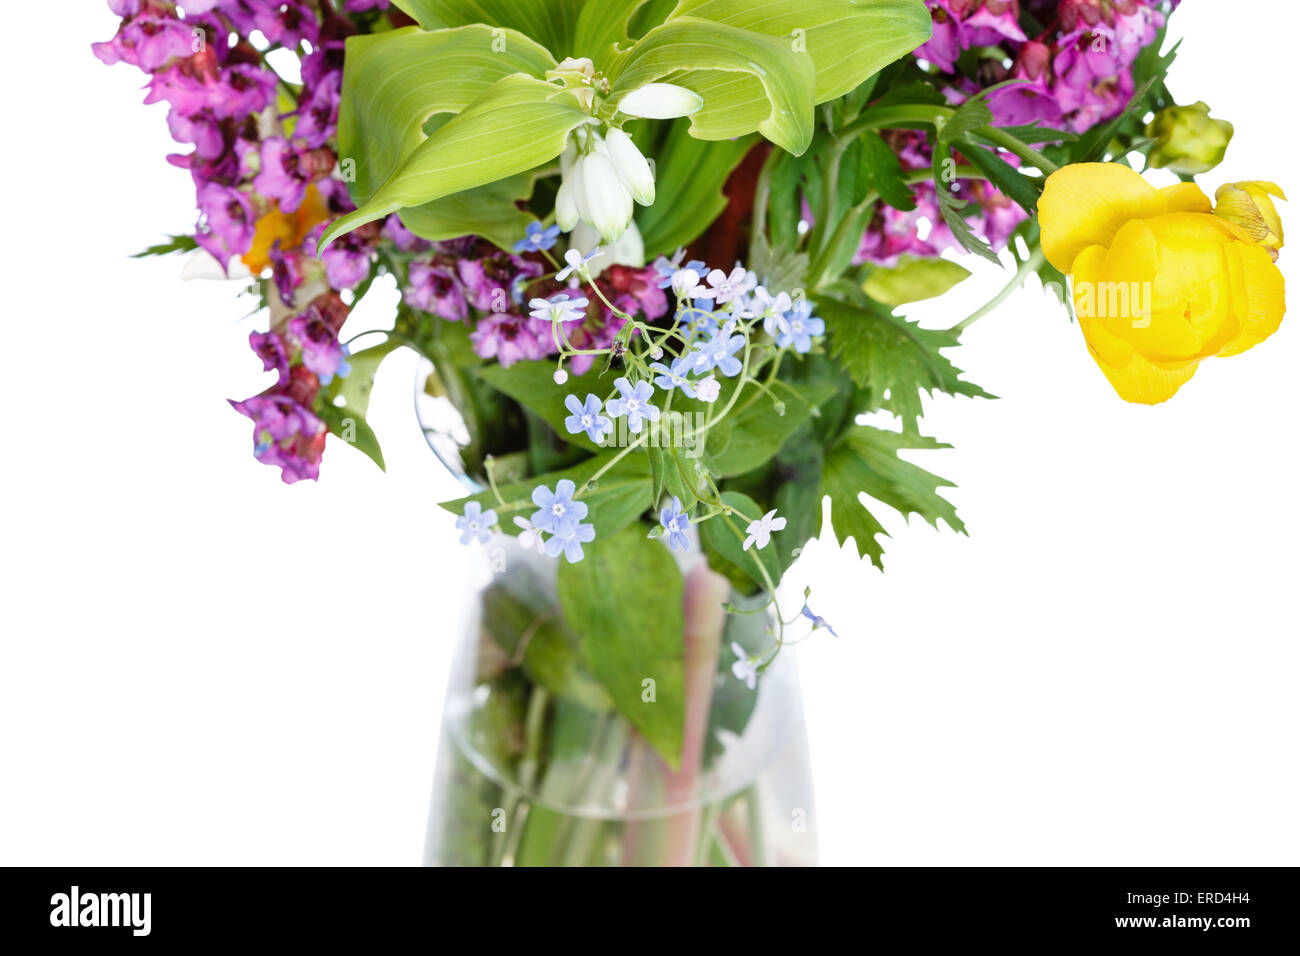 bunch of wild flowers in glass vase on white background Stock Photo